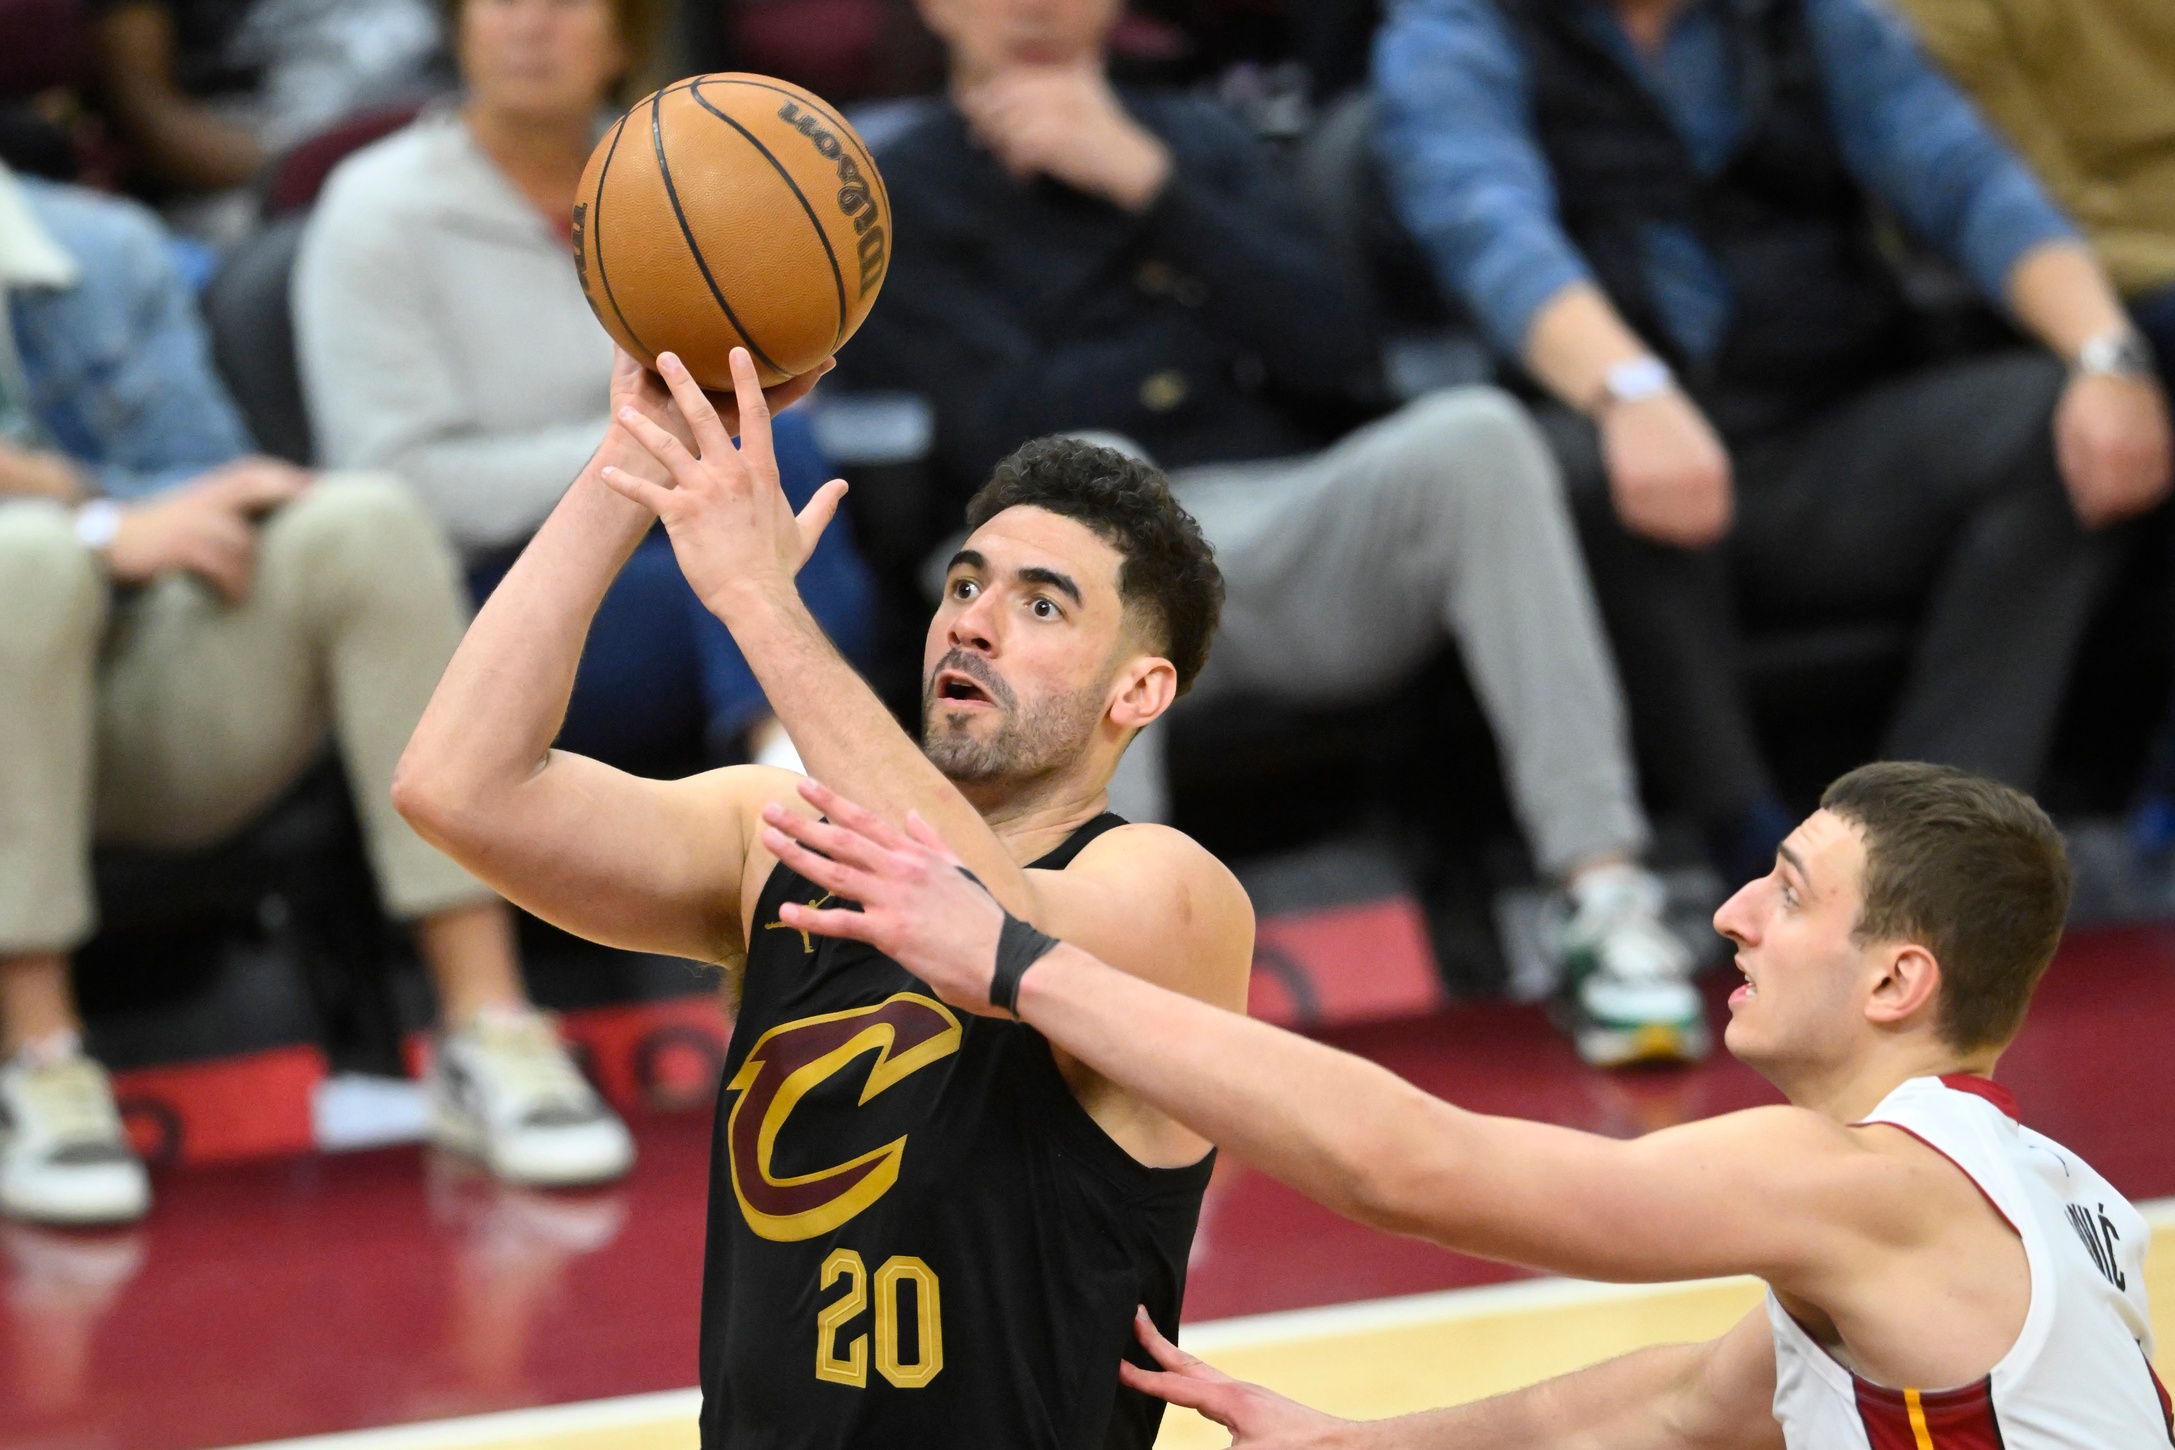 Cleveland Cavaliers, Georges Niang